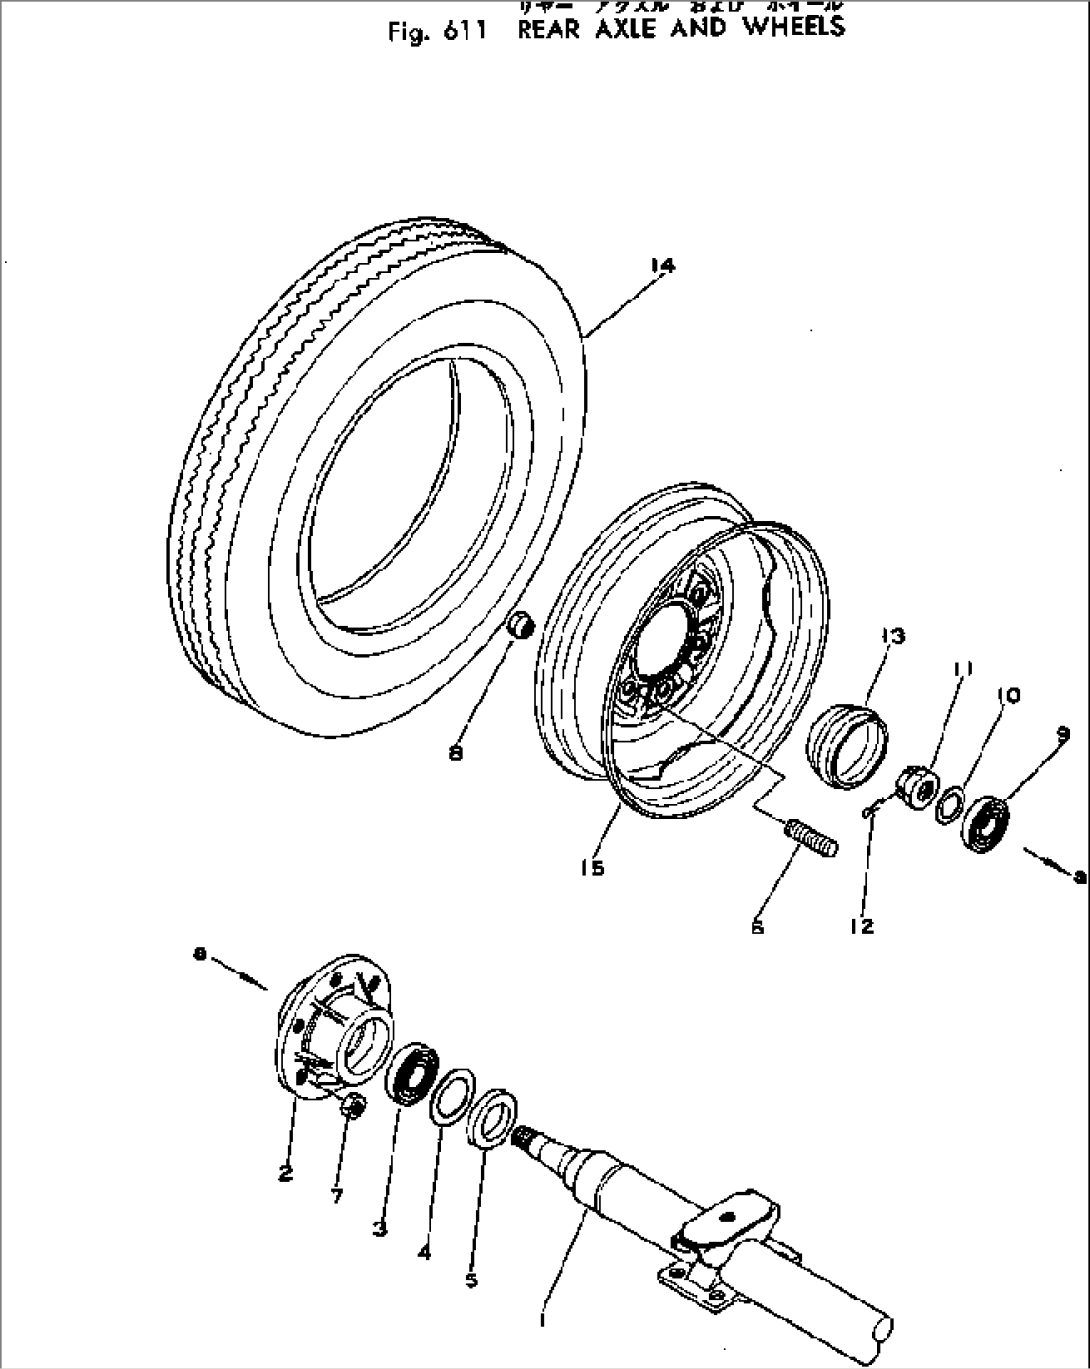 REAR AXLE AND WHEELS